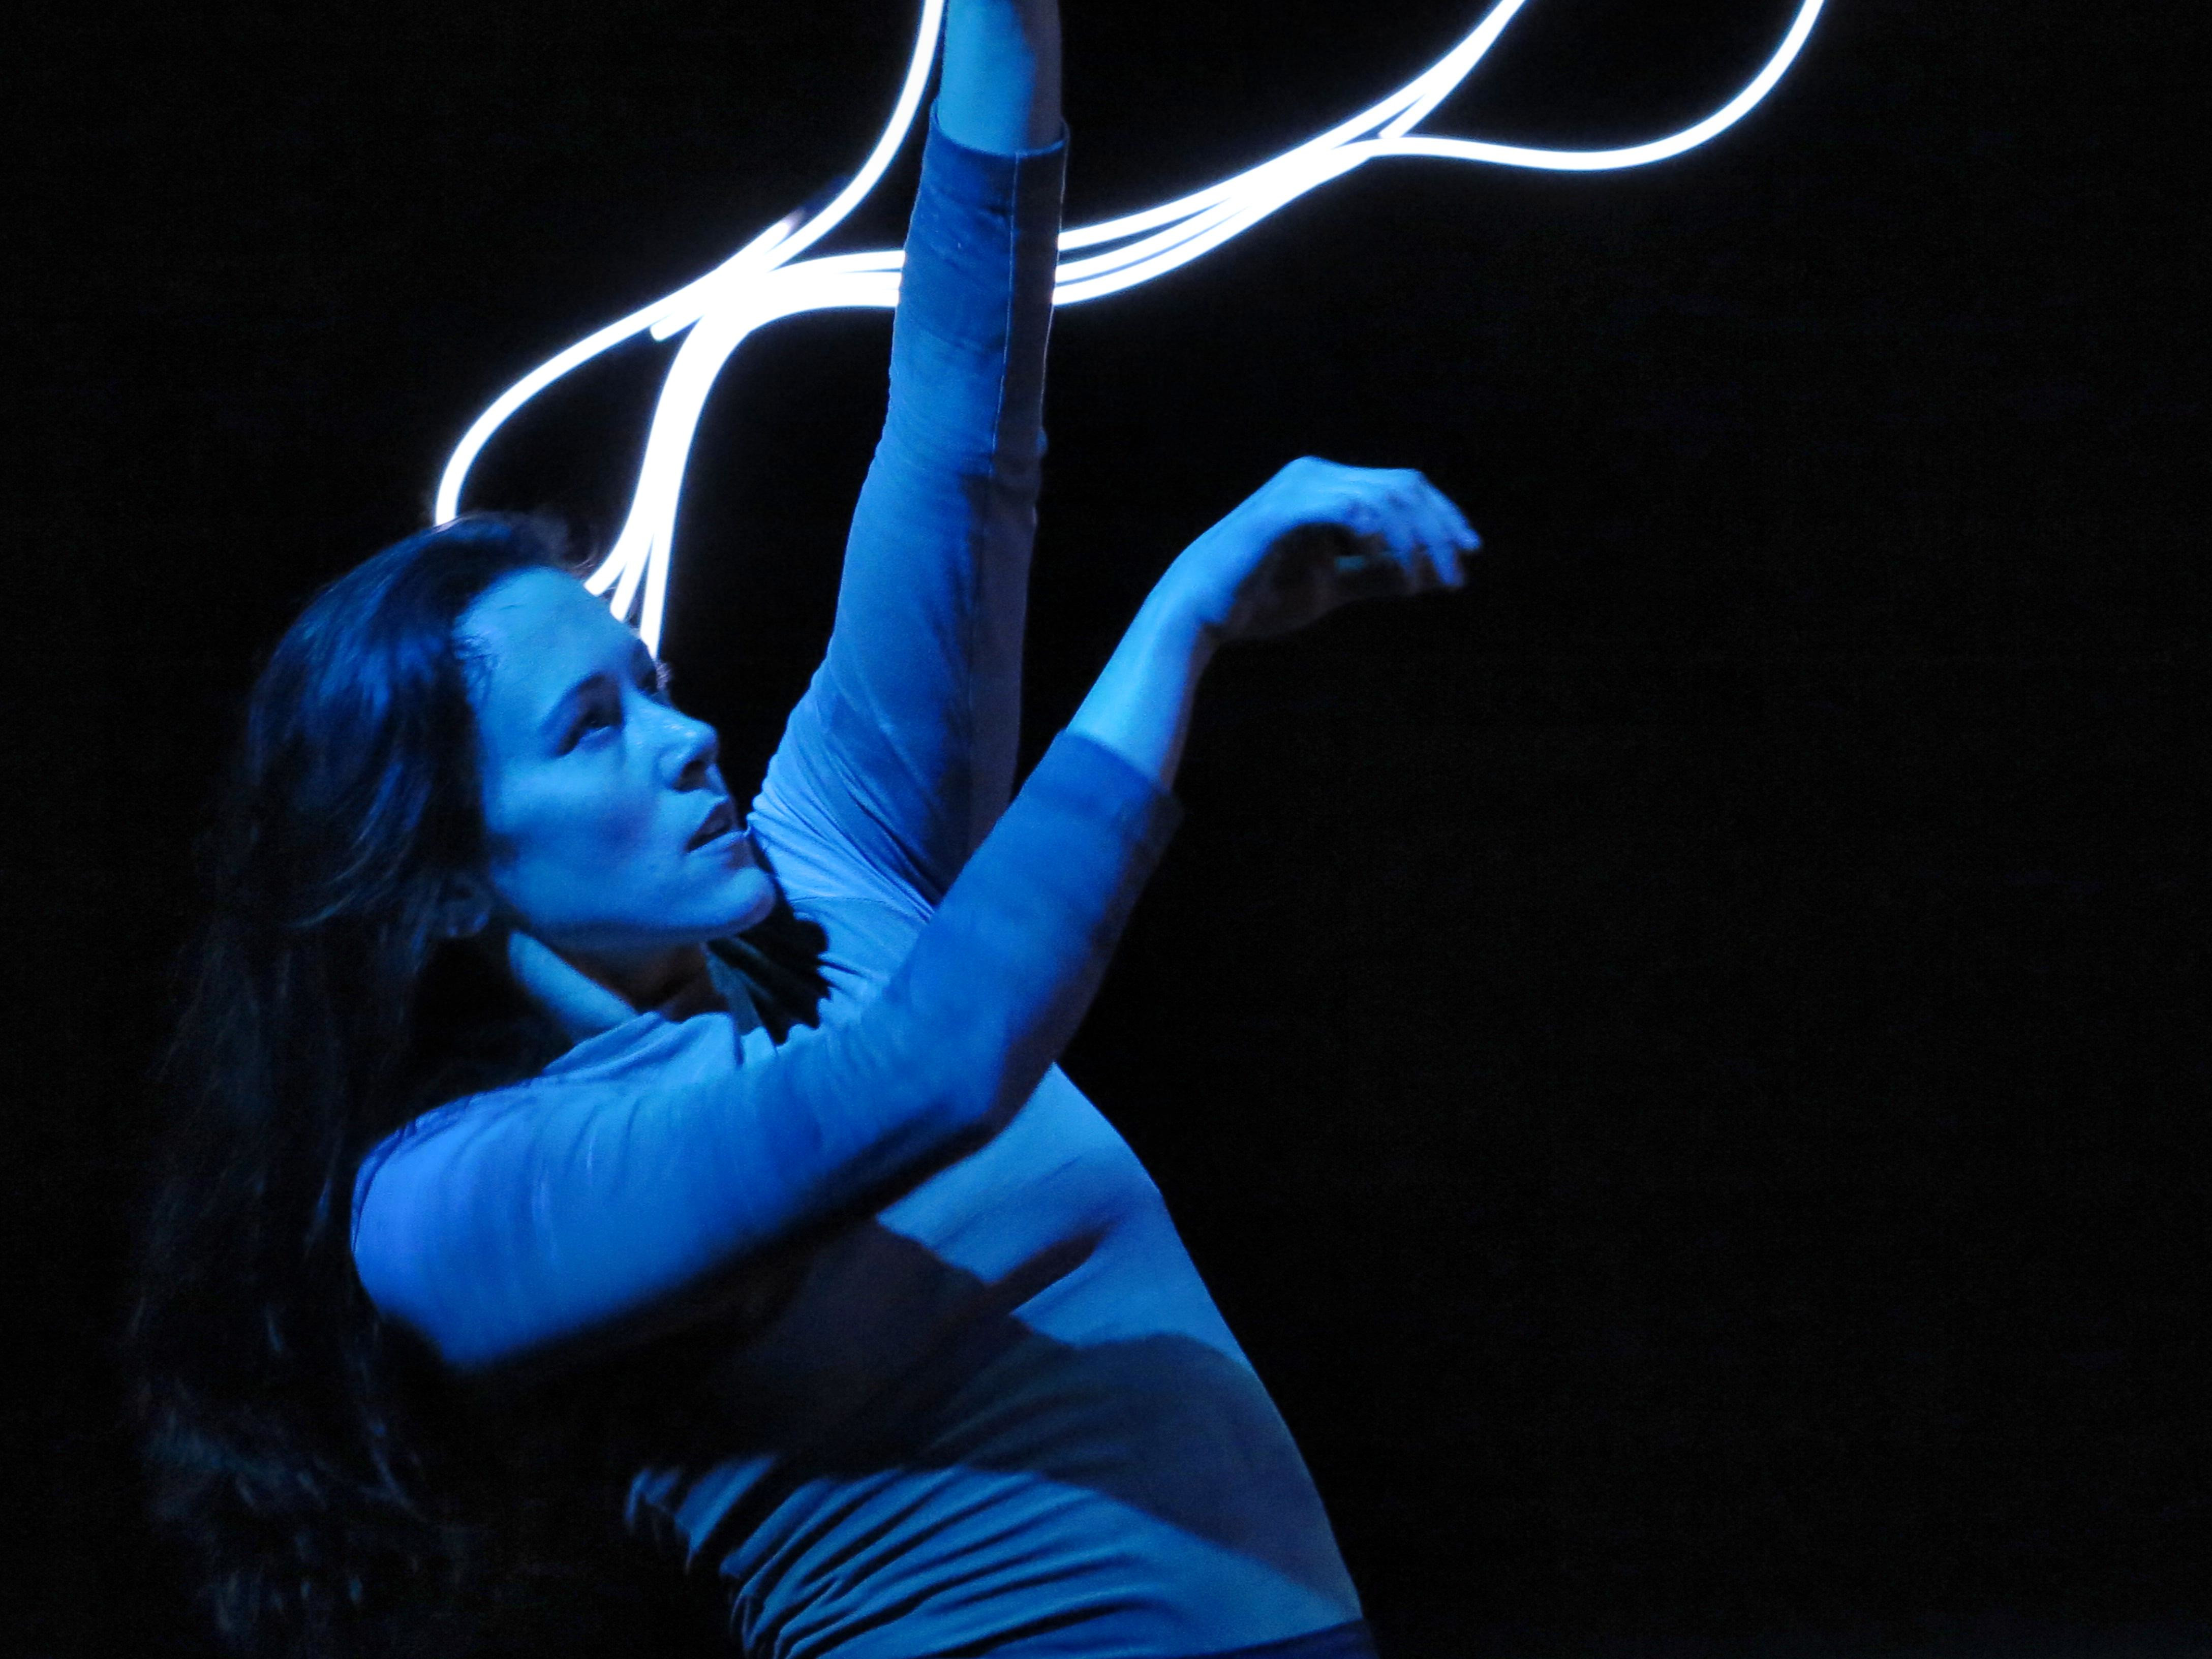 the torso of a female dancer with long brown hair set against the neon light sculpture.. she stands in profile looks towards her outstreched arms